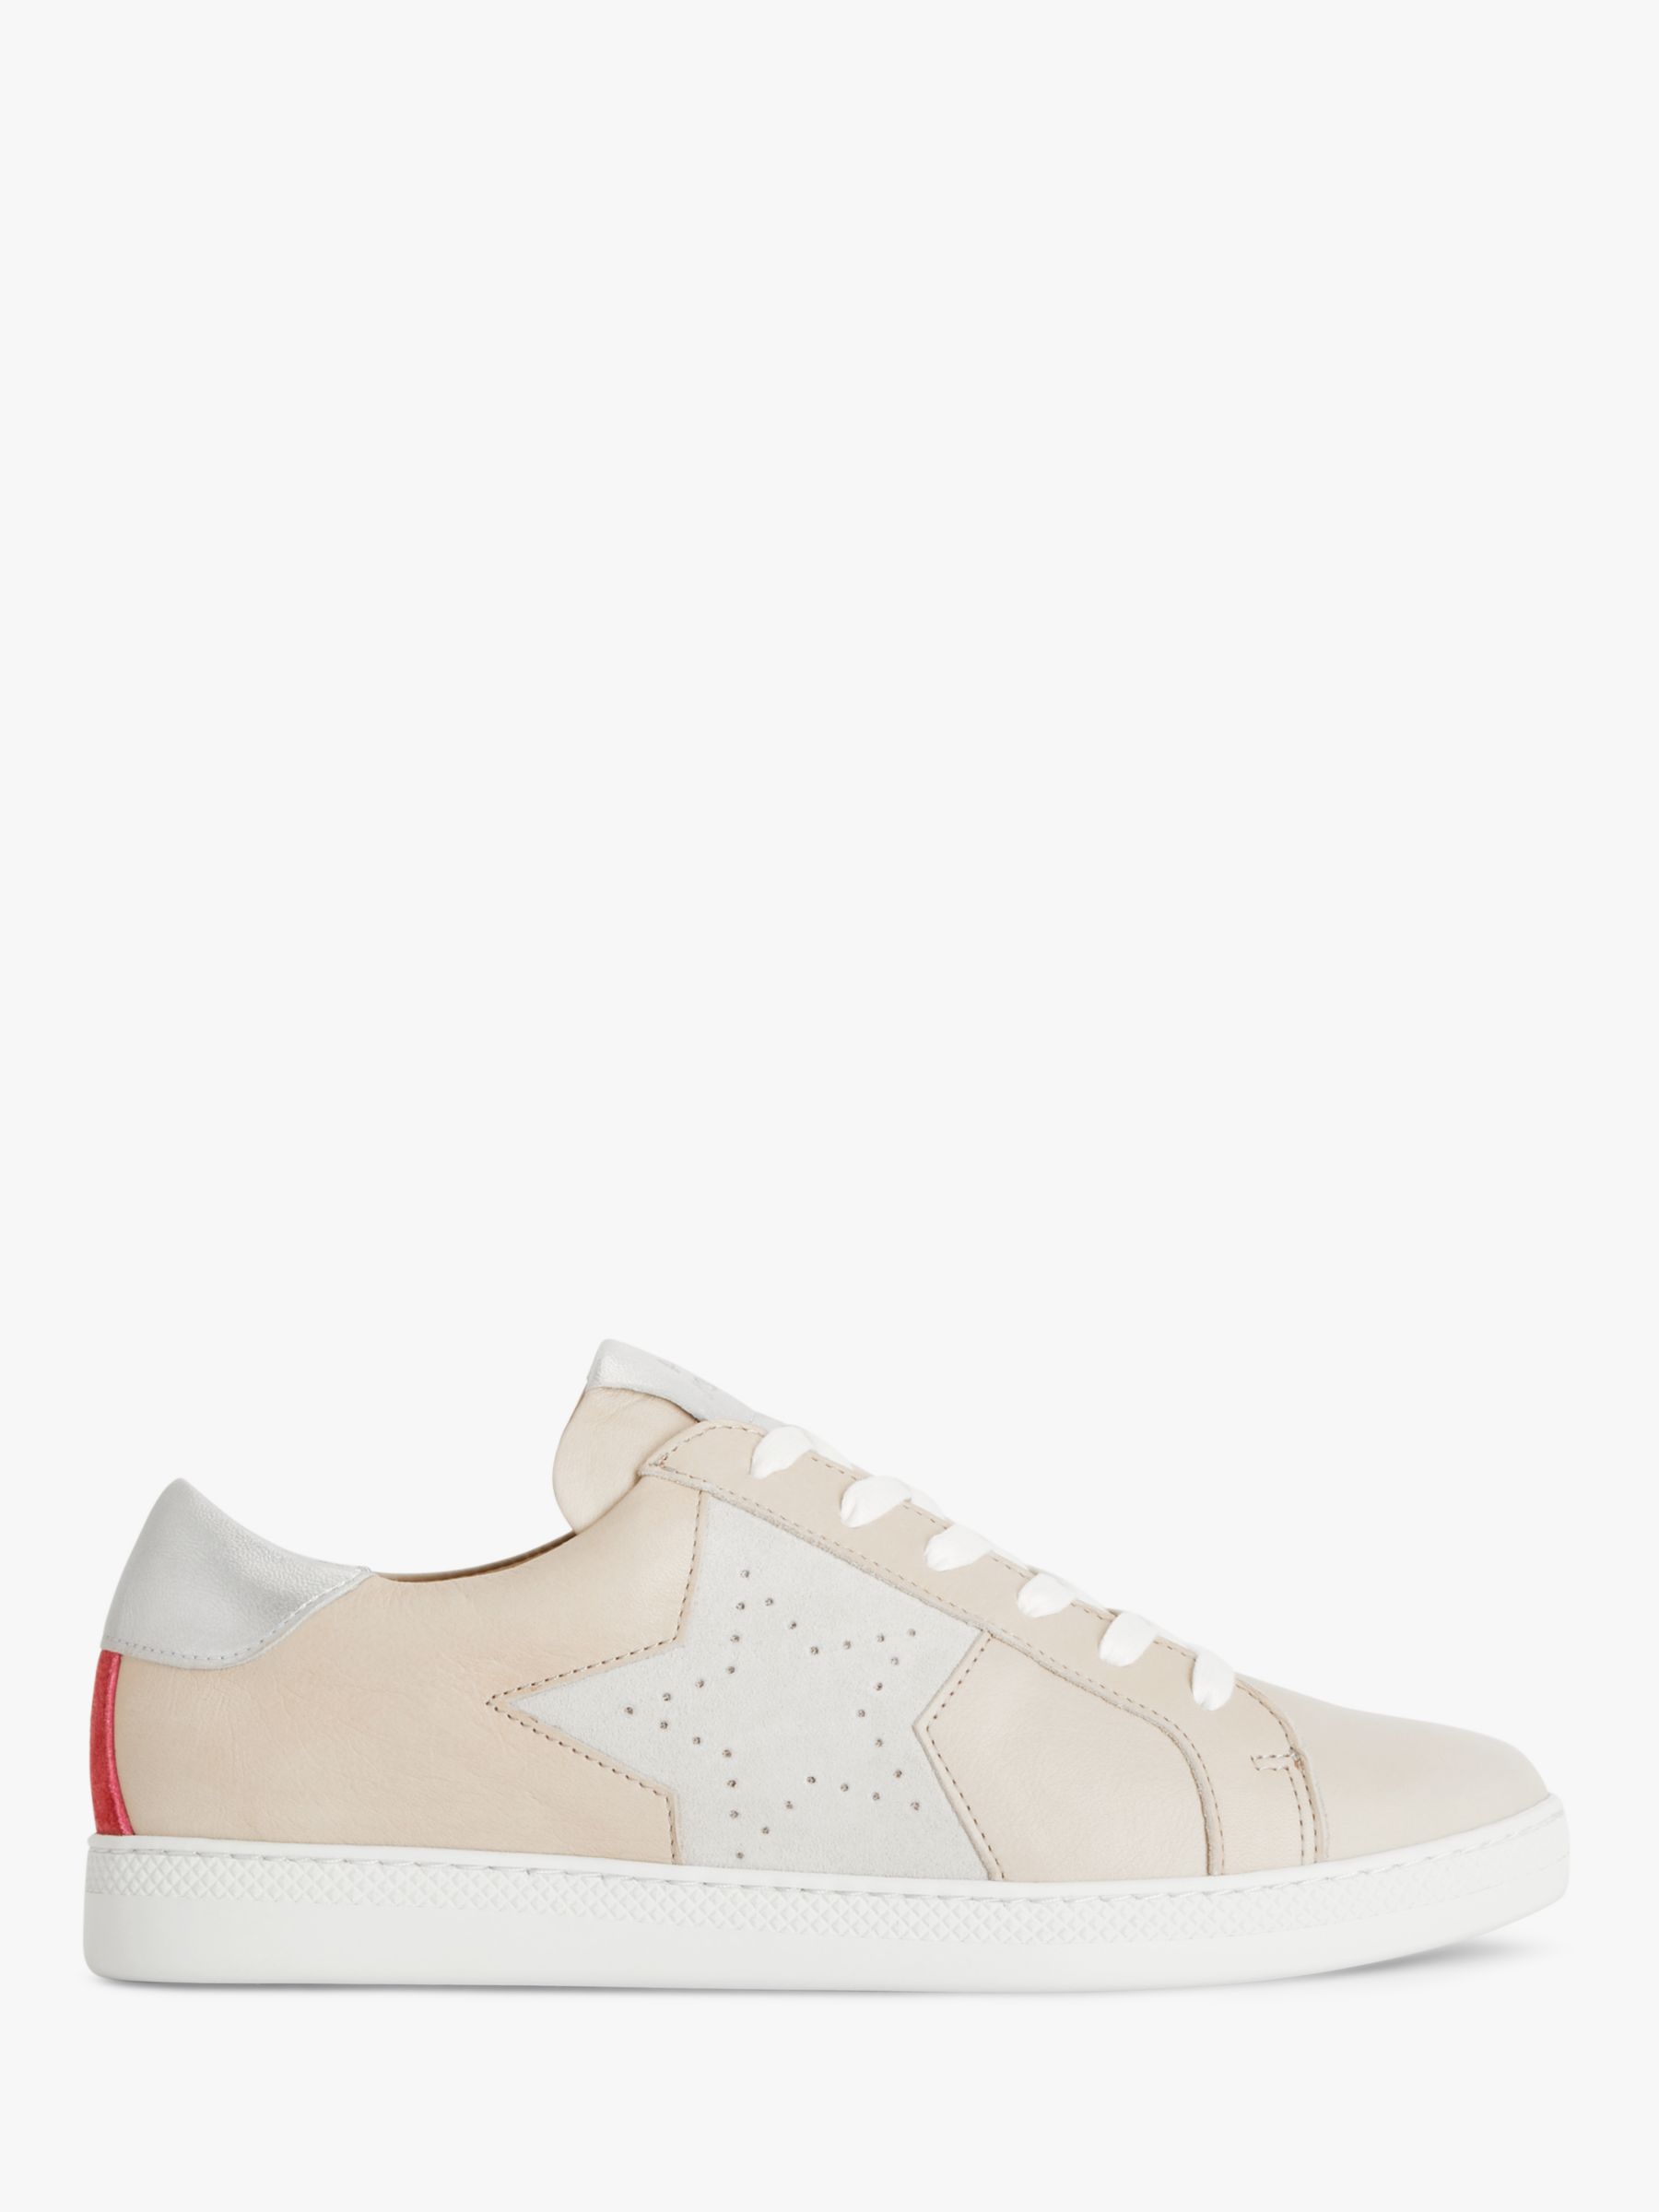 AND/OR Estar Leather Star Detail Trainers